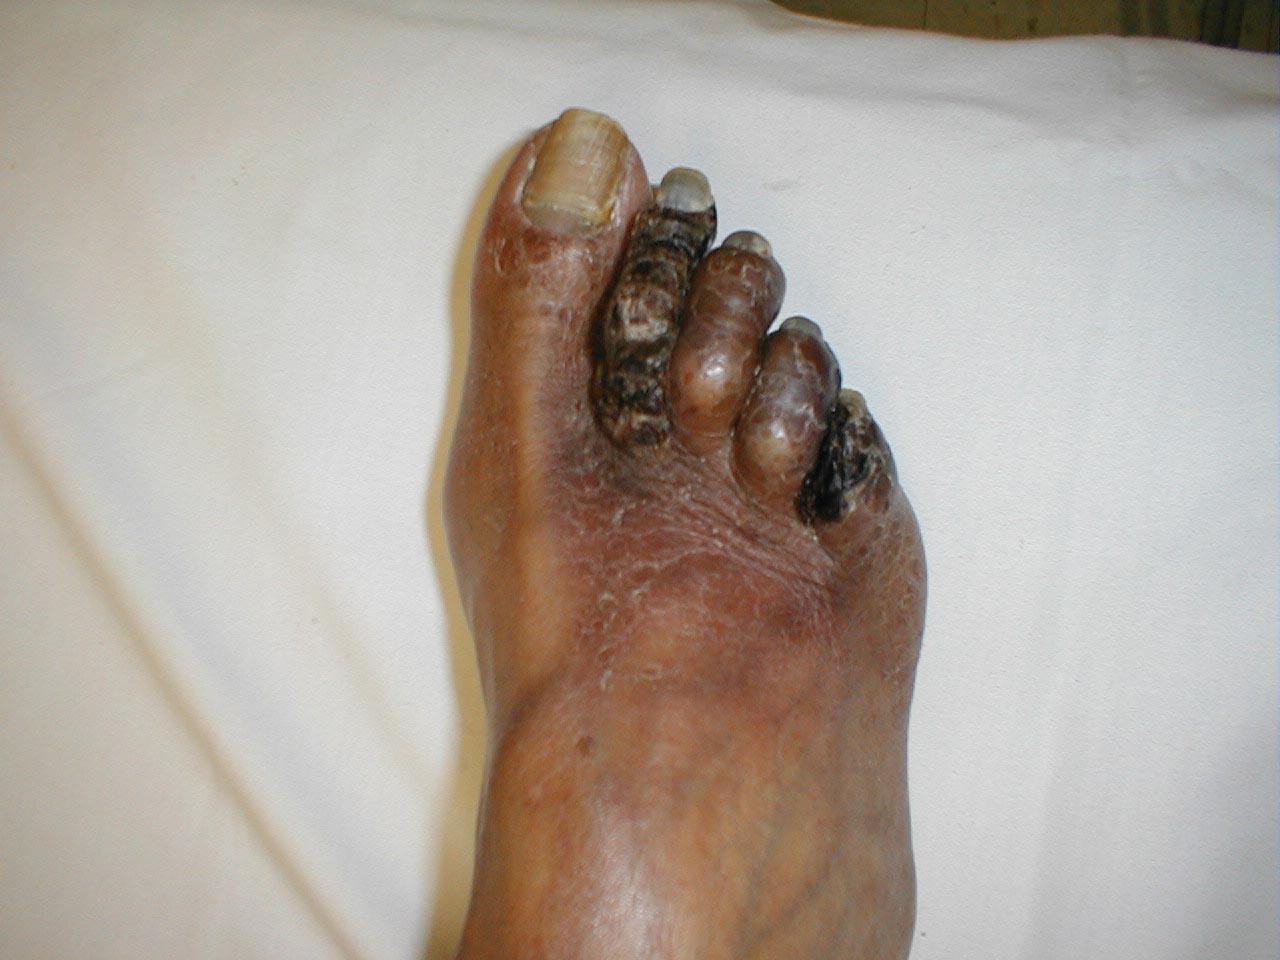 Patient with peripheral vascular disease that has lead to infarct of several toes.